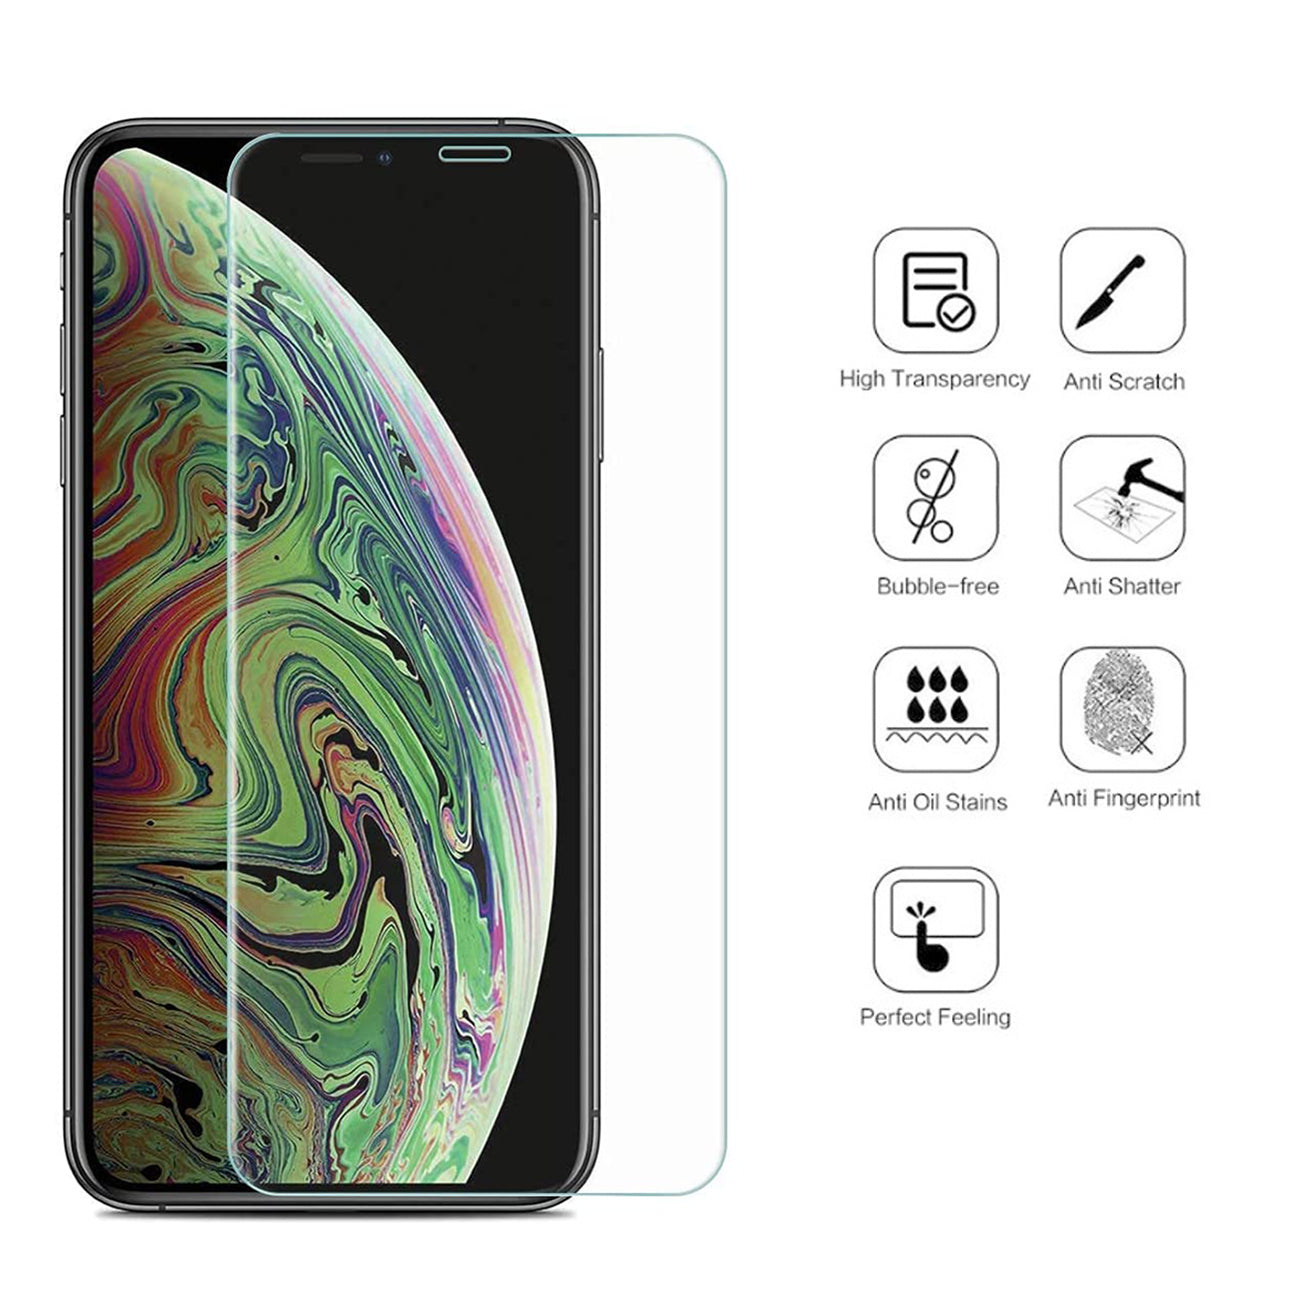 Premium (10 Pack) 0.33mm 2.5D Tempered Glass for iPhone XR/11 / iPhone 12/12 Pro